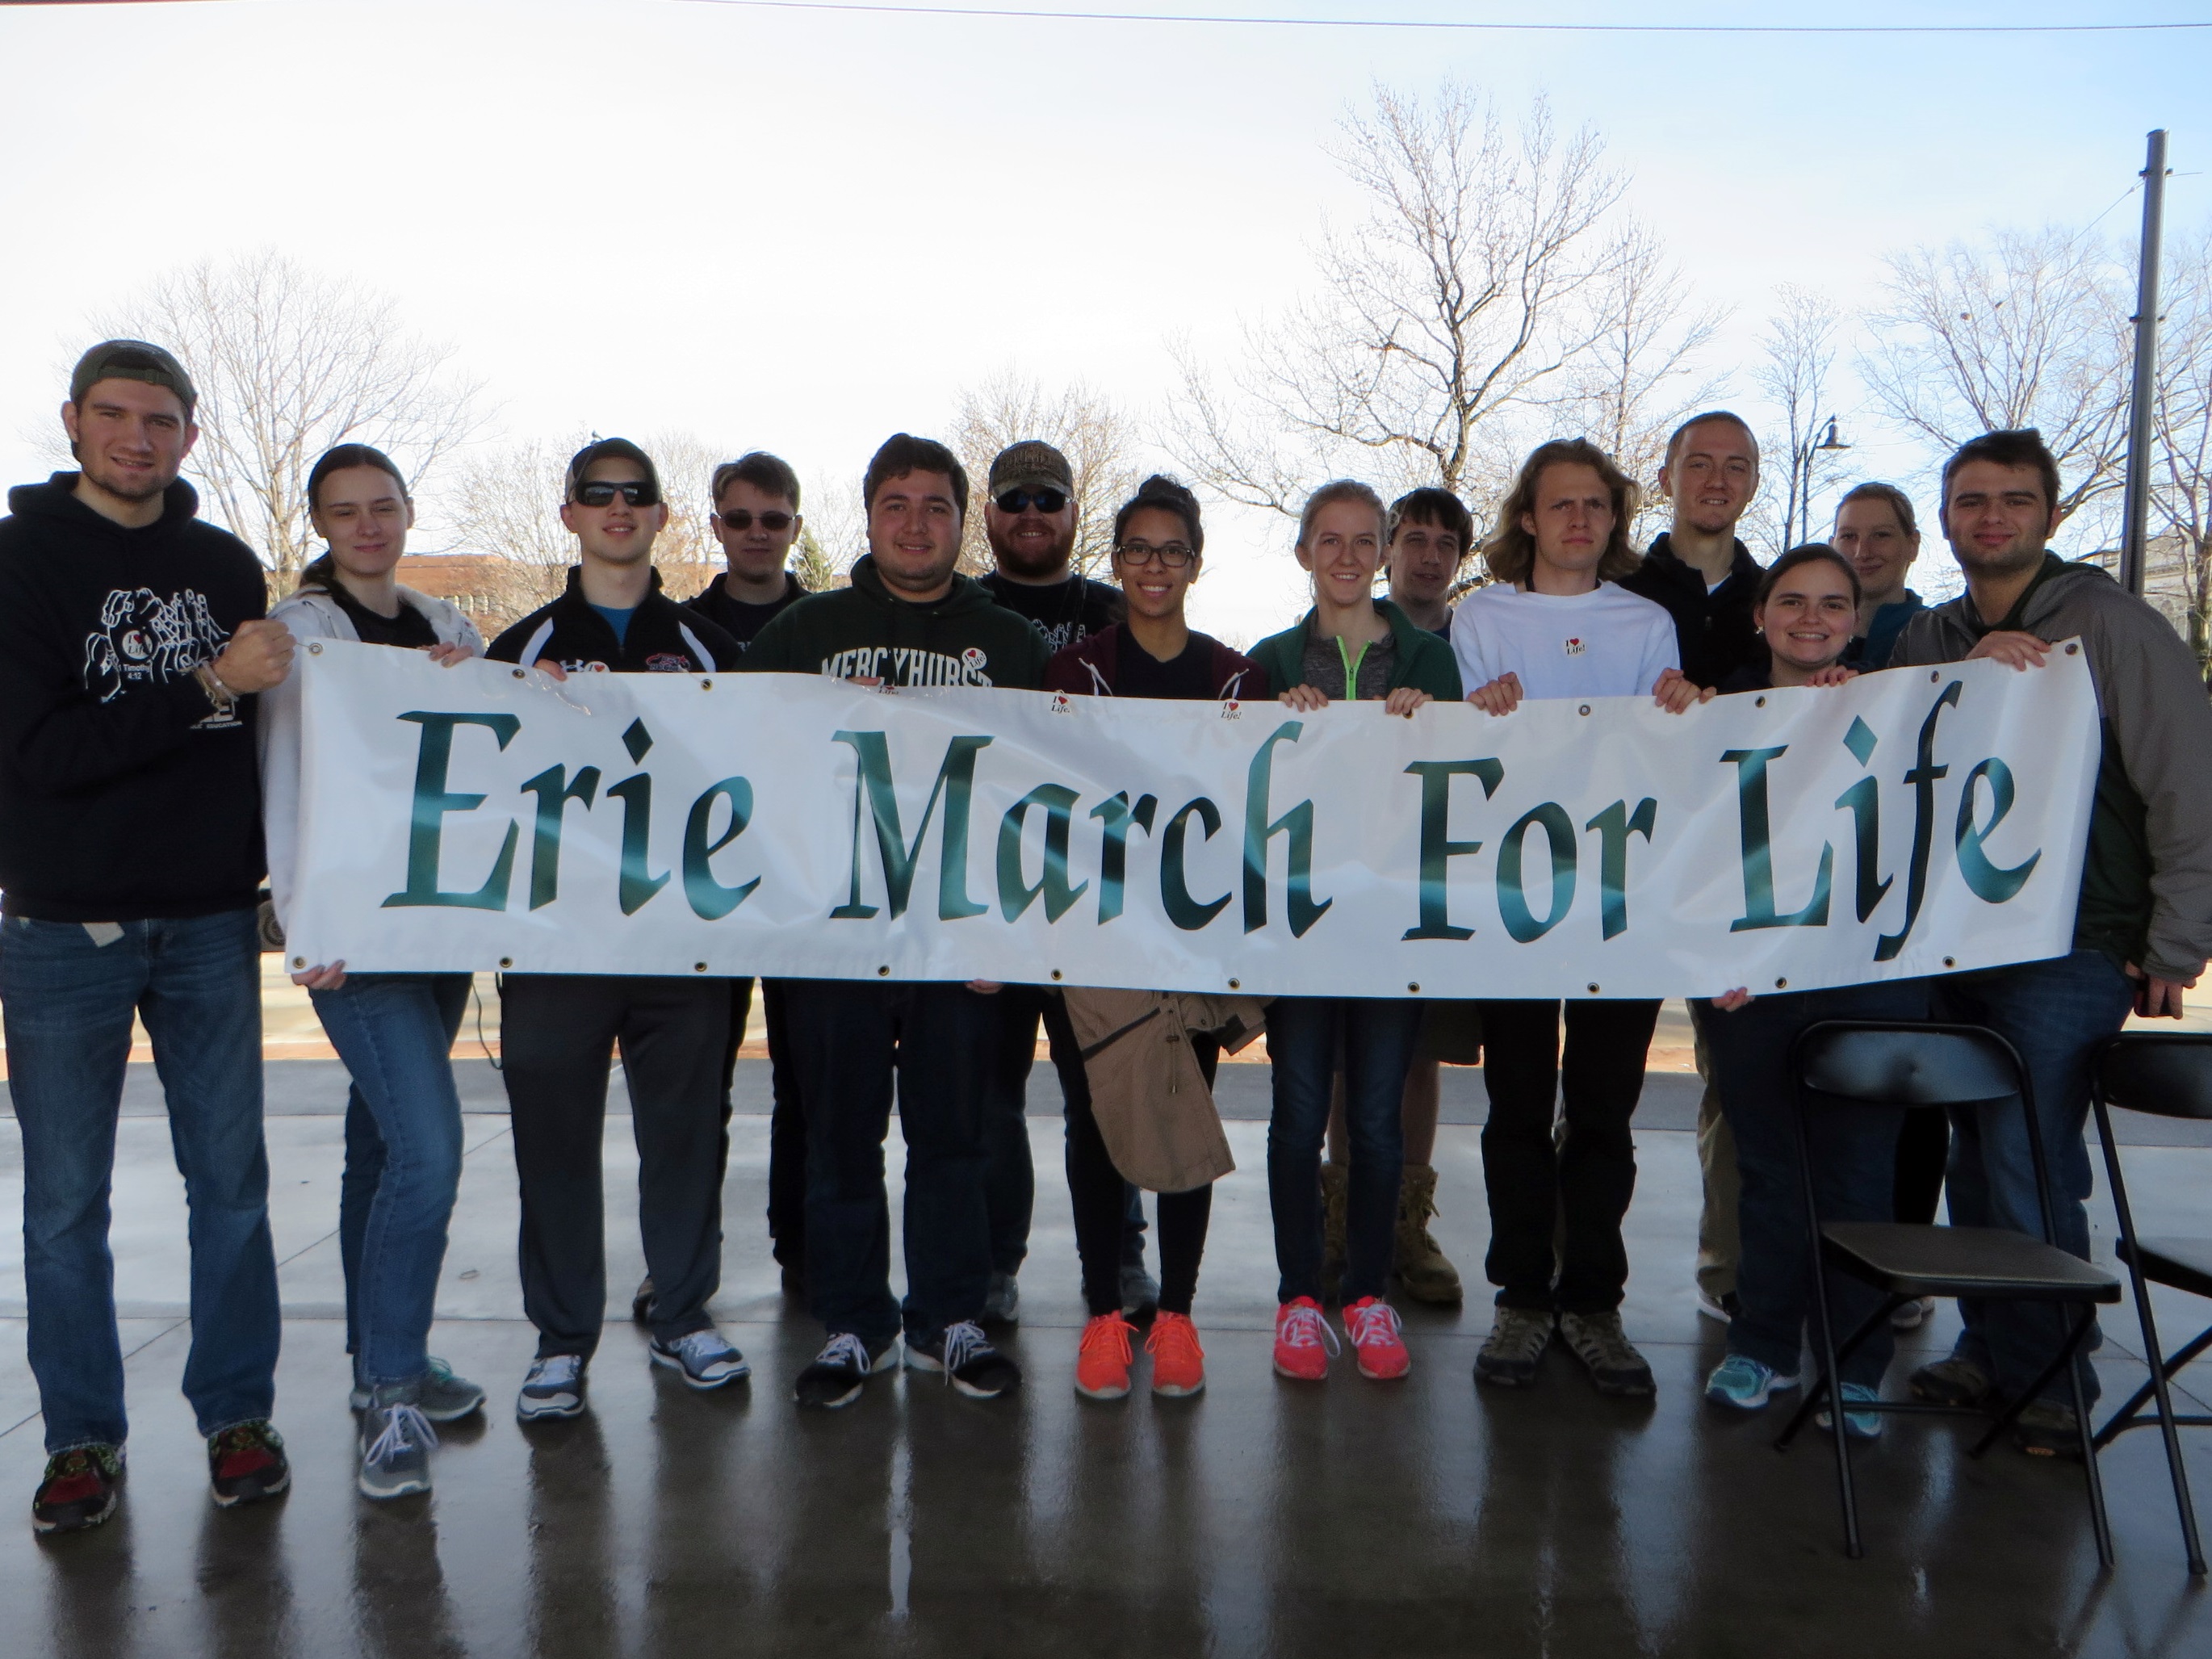 People for Life - Erie, Pennsylvania